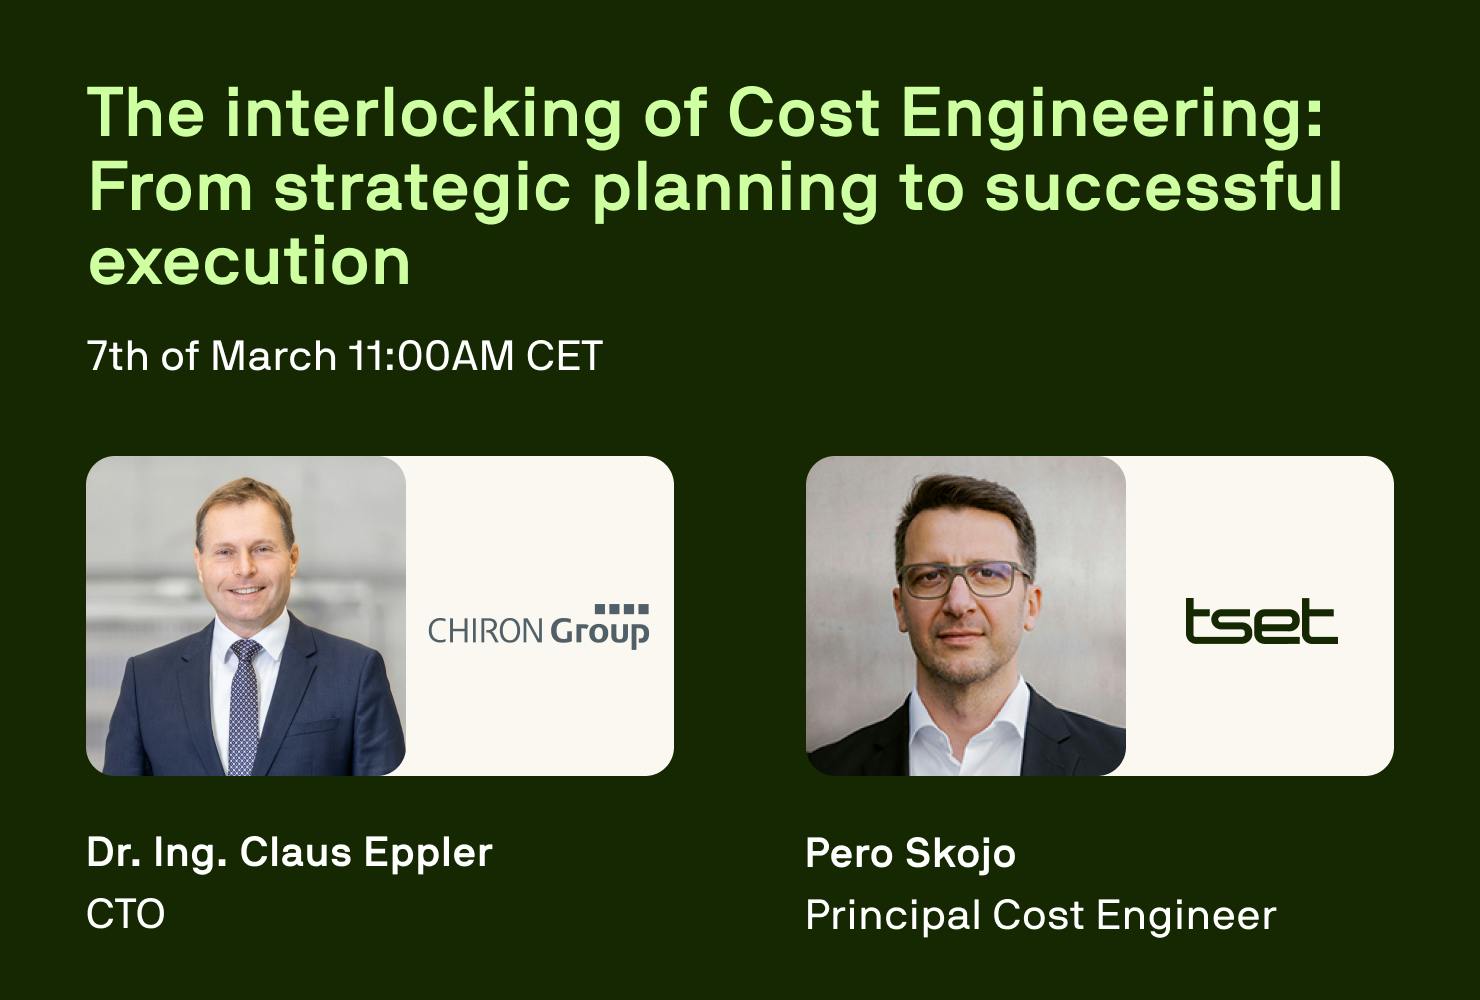 The interlocking of Cost Engineering: From strategic planning to successful execution